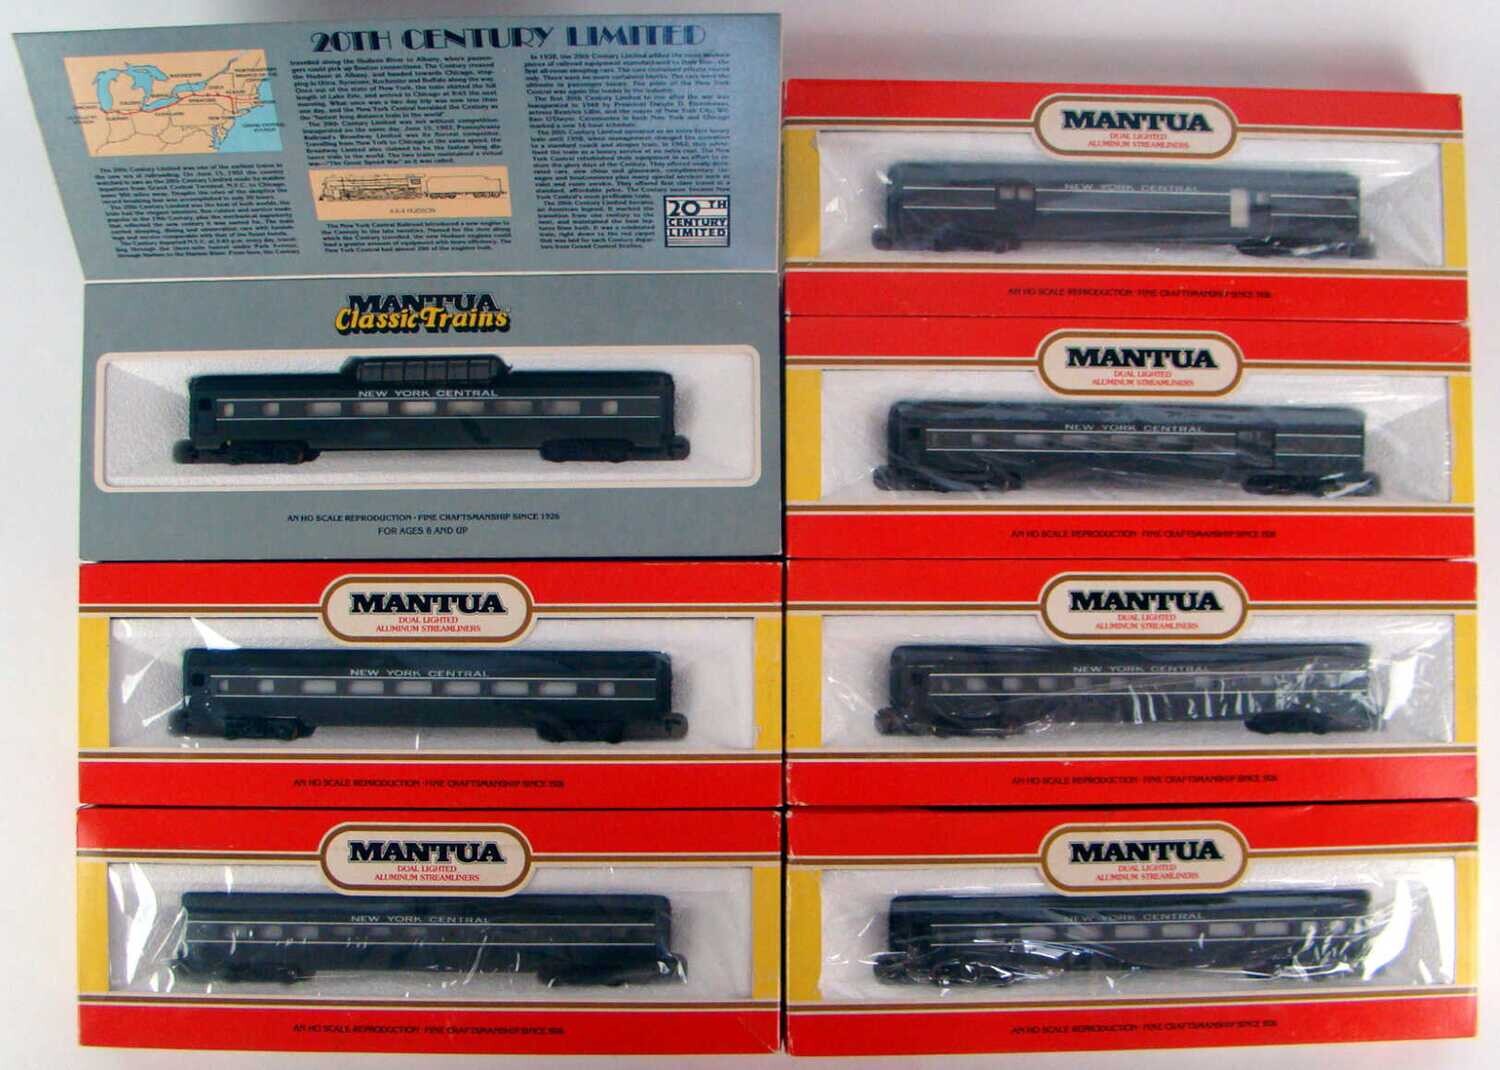 CLASSIC COMPLETE Mantua 7-Coach NYC 20th Century Limited Streamlined Coach Set HO Scale